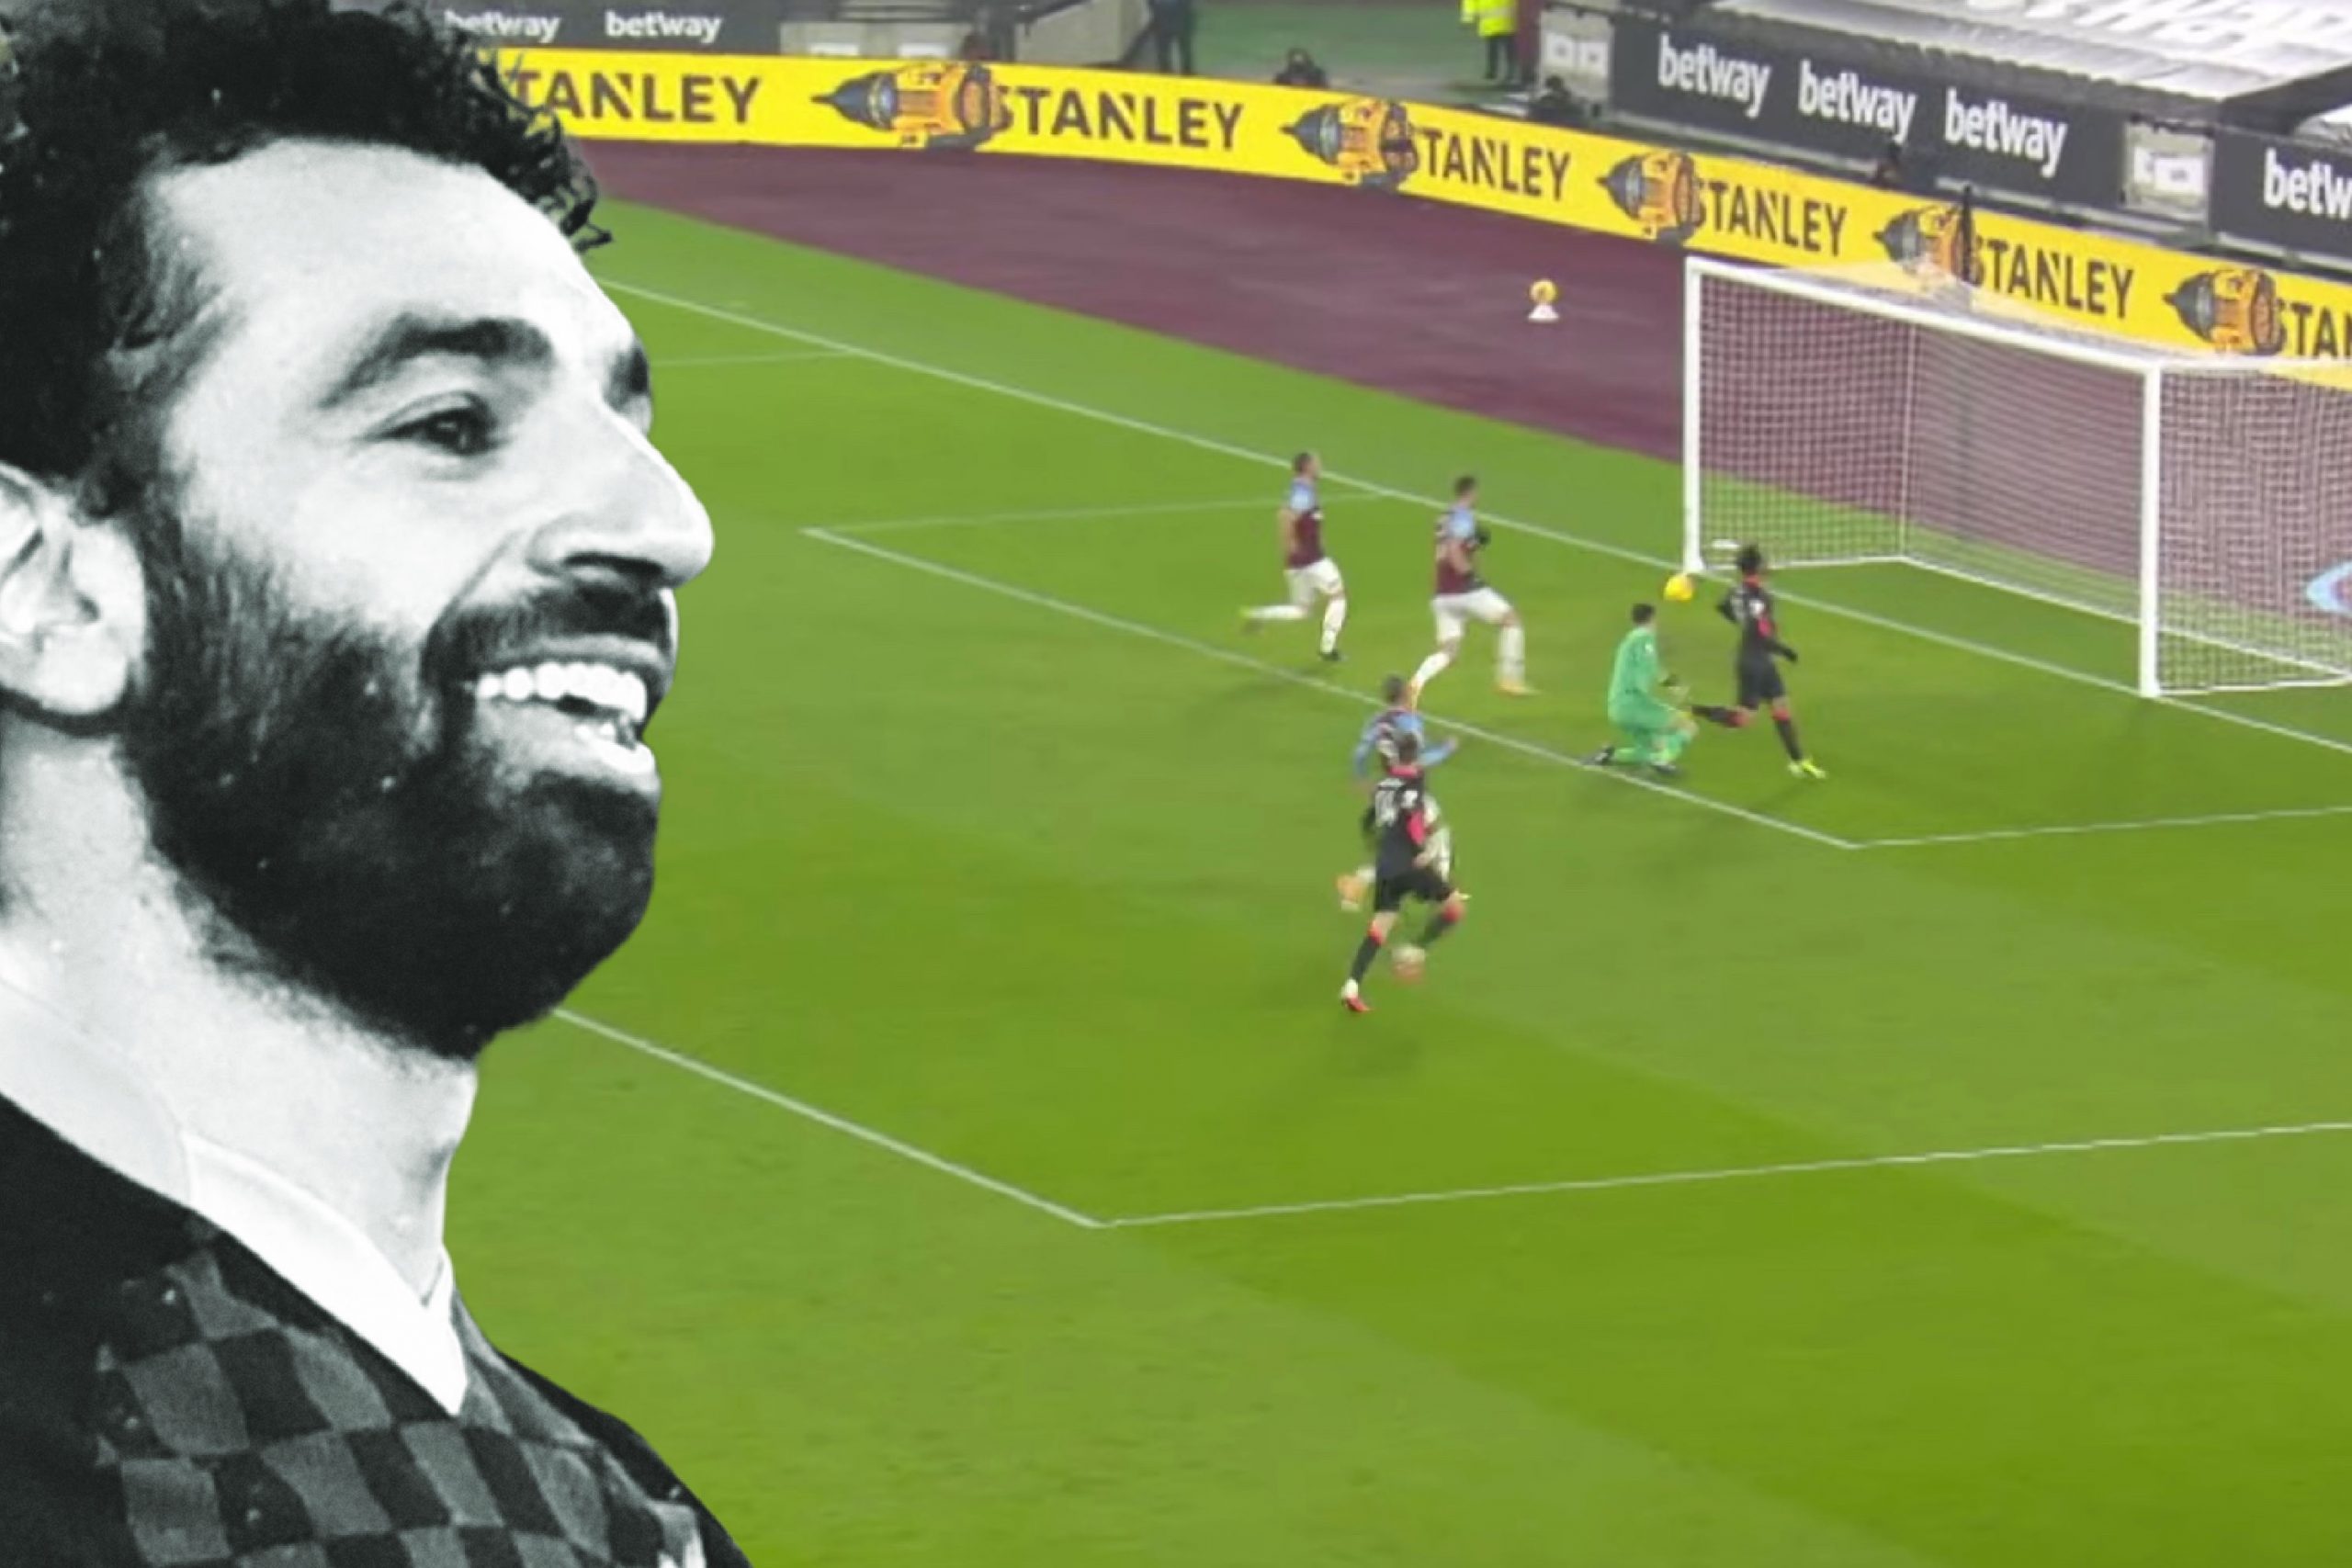 West Ham 1-3 Liverpool Highlights: Salah finishes insane counter-attack goal